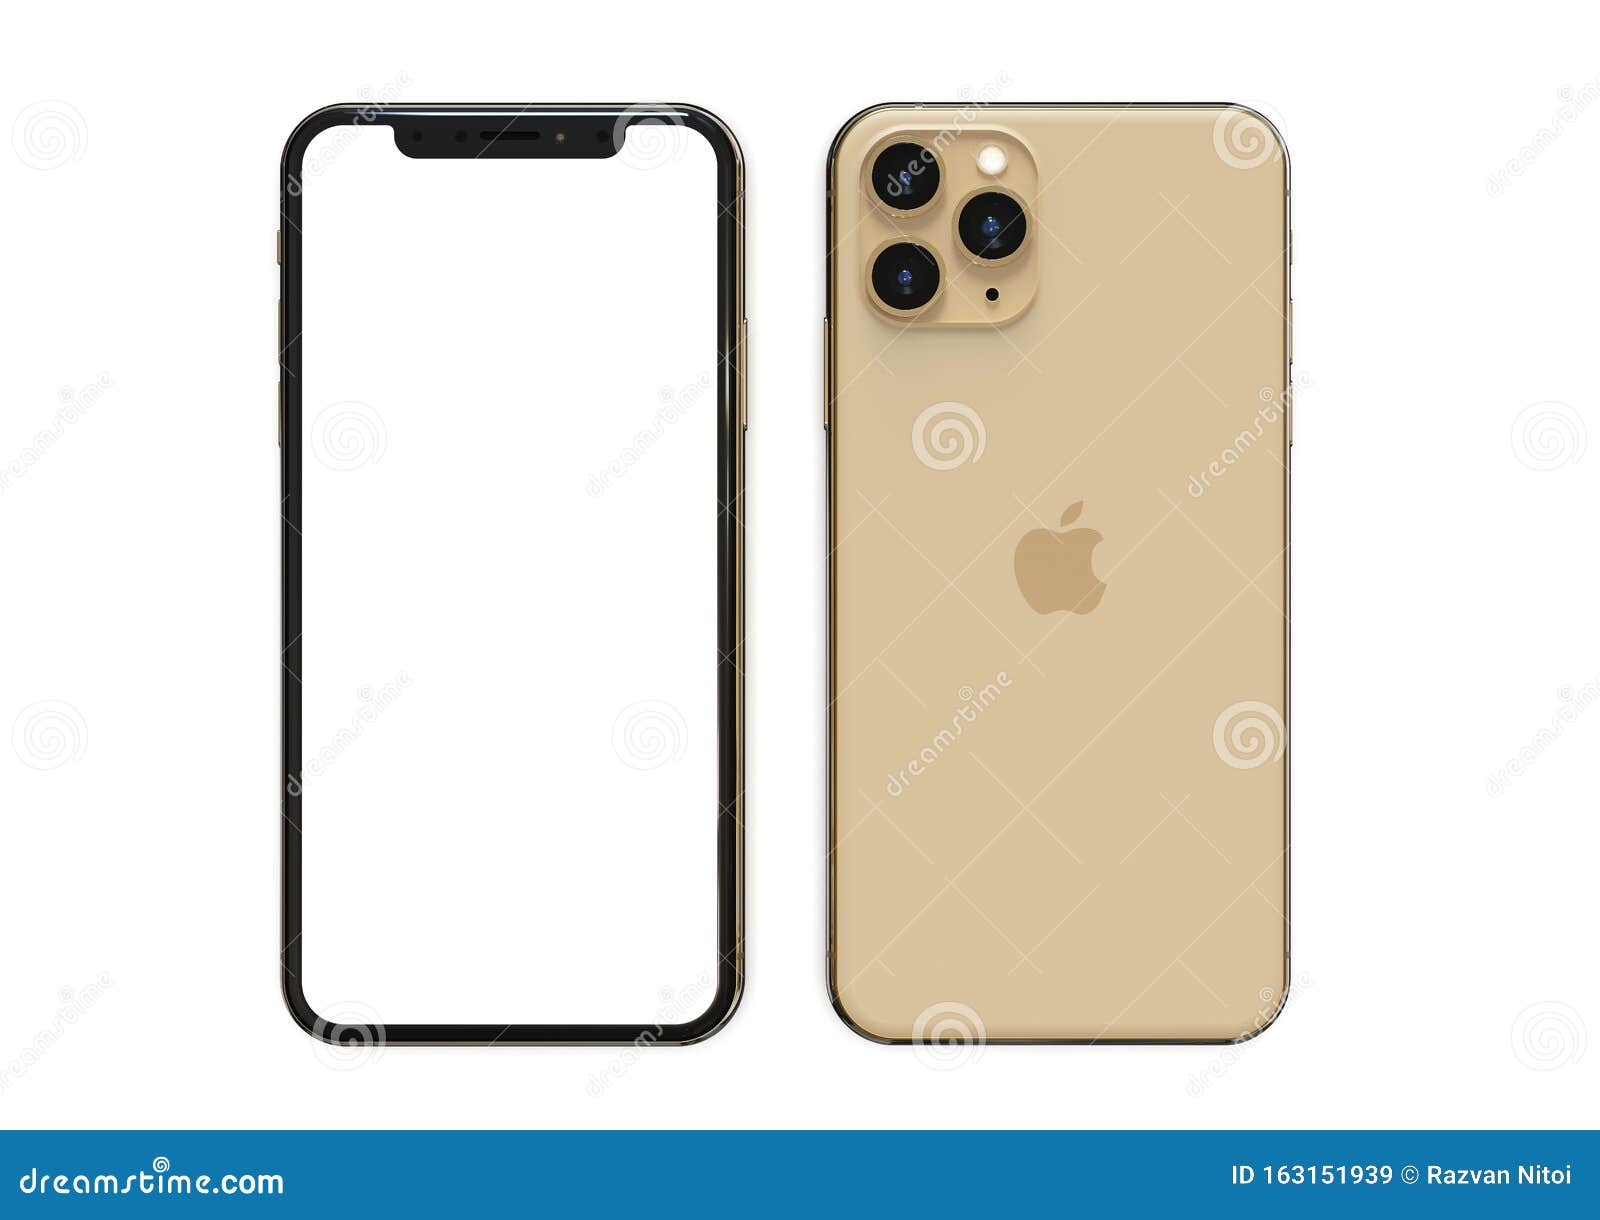 Apple Iphone 11 Pro Gold 2019 Both Sides Frontal Editorial Stock Image Image Of Digital Gadget 163151939